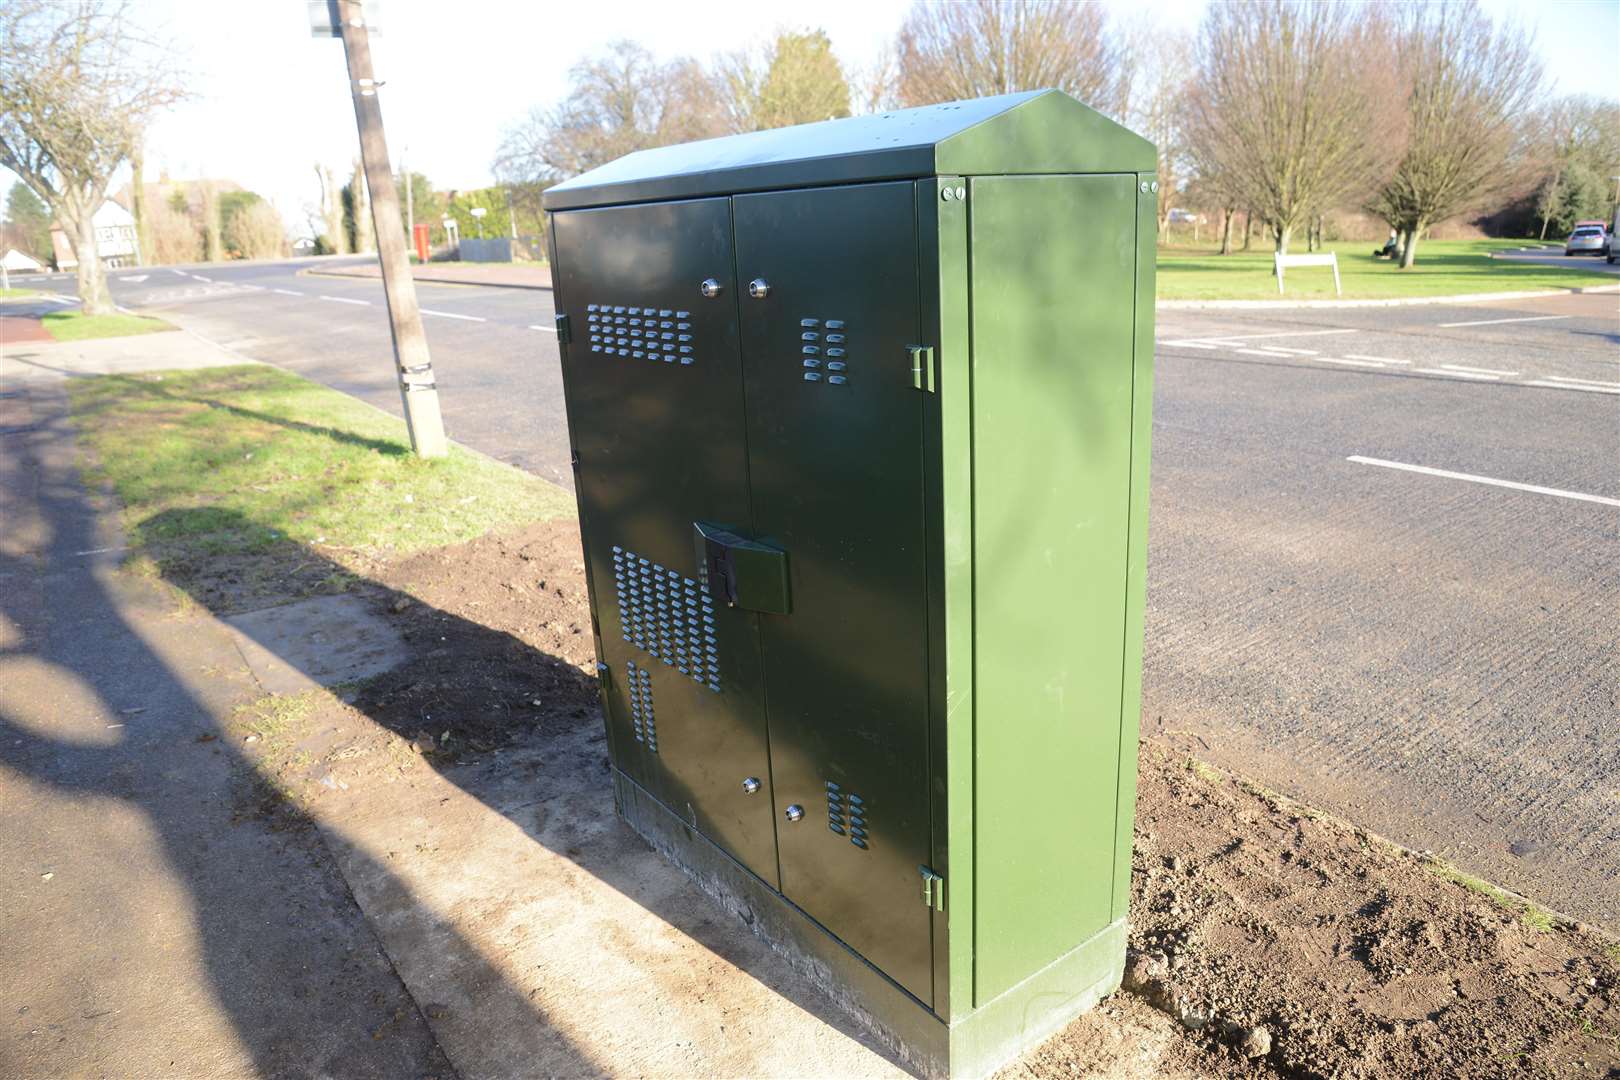 A broadband box of the kind installed across Kent